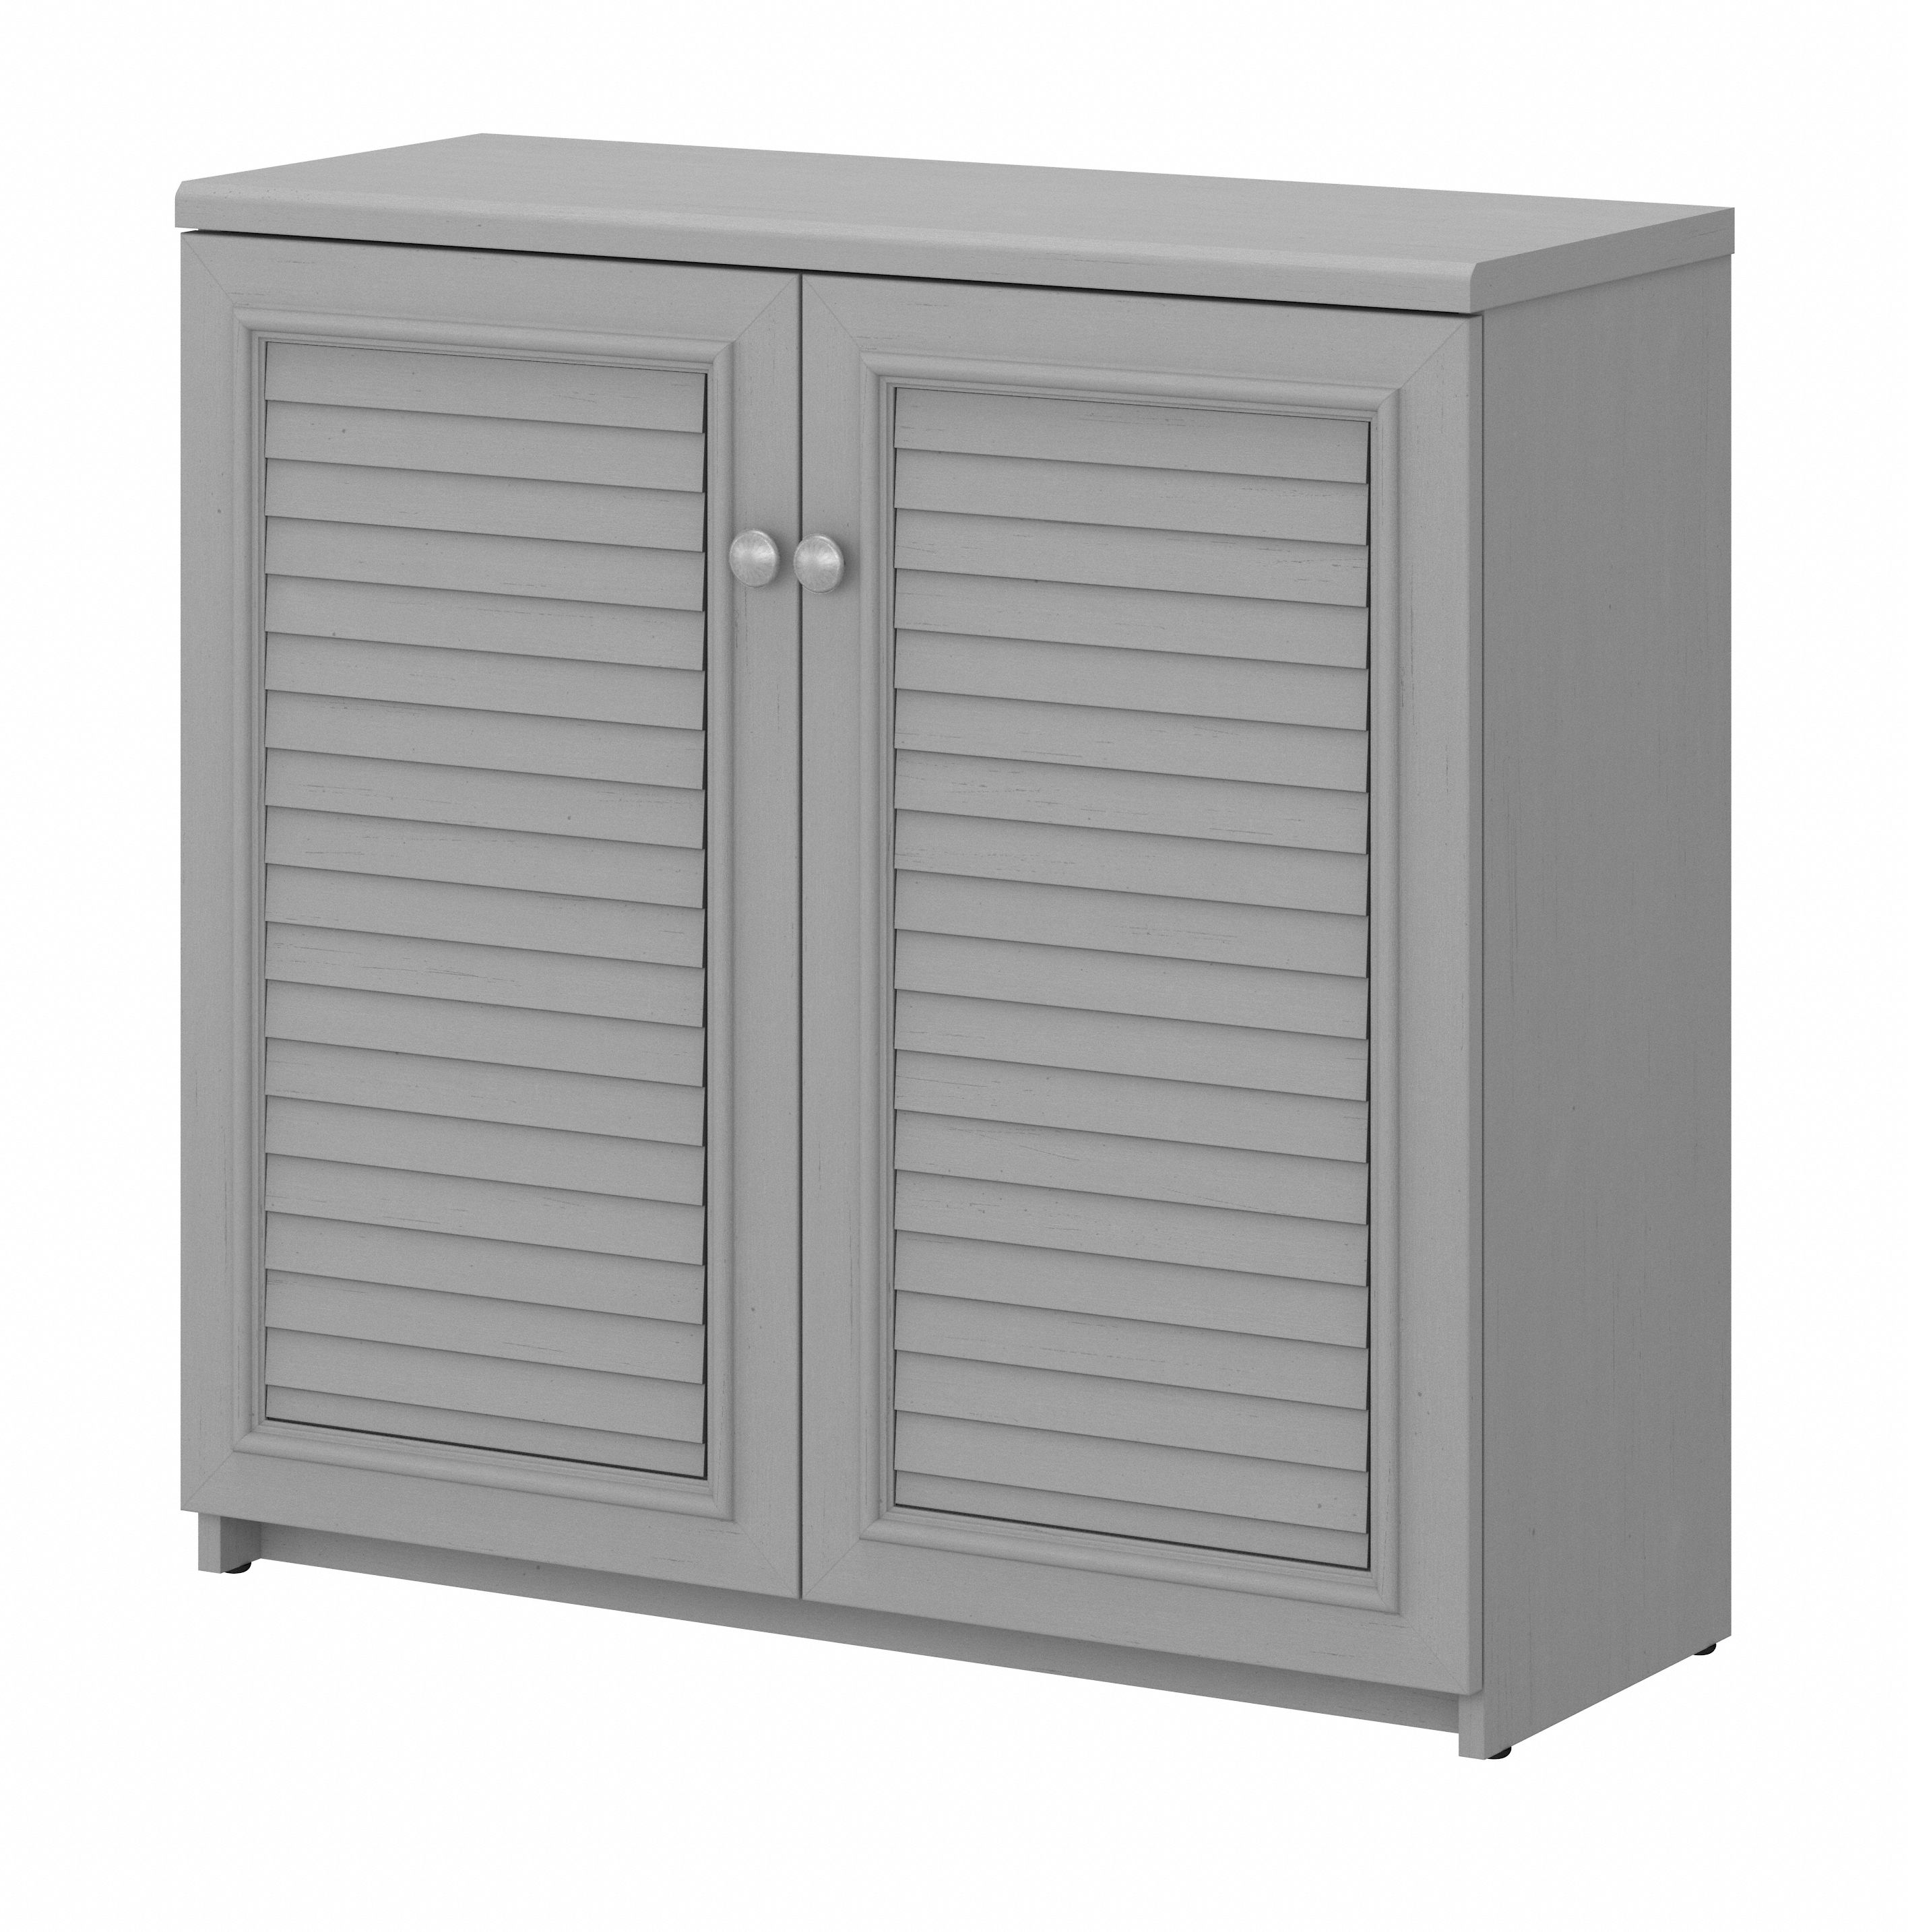 Shop Bush Furniture Fairview Small Storage Cabinet with Doors and Shelves 02 WC53596-03 #color_cape cod gray